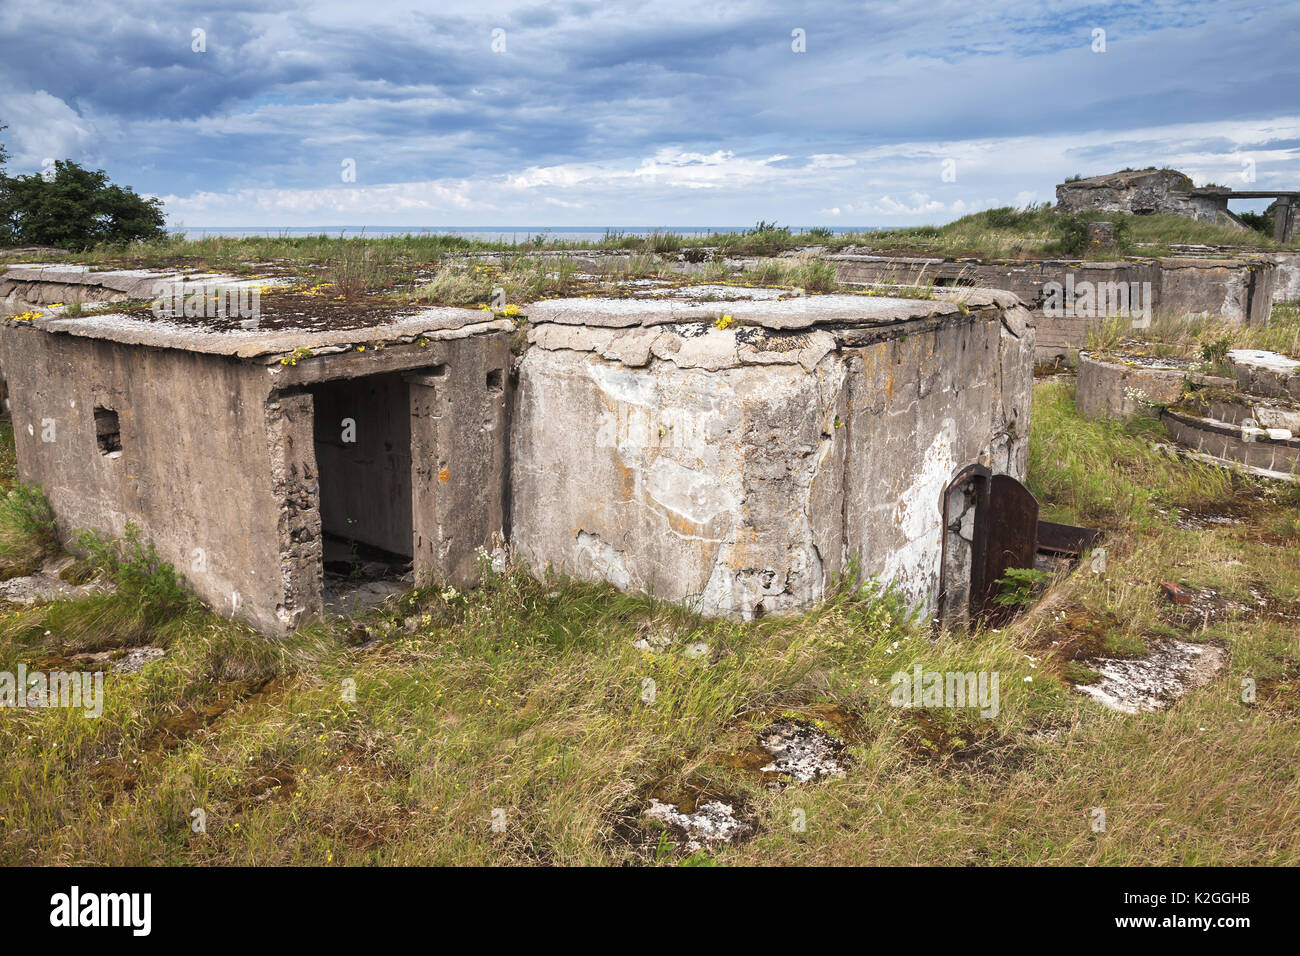 Old abandoned concrete bunker from WWII period on Totleben fort island in Gulf of Finland near Saint-Petersburg in Russia Stock Photo